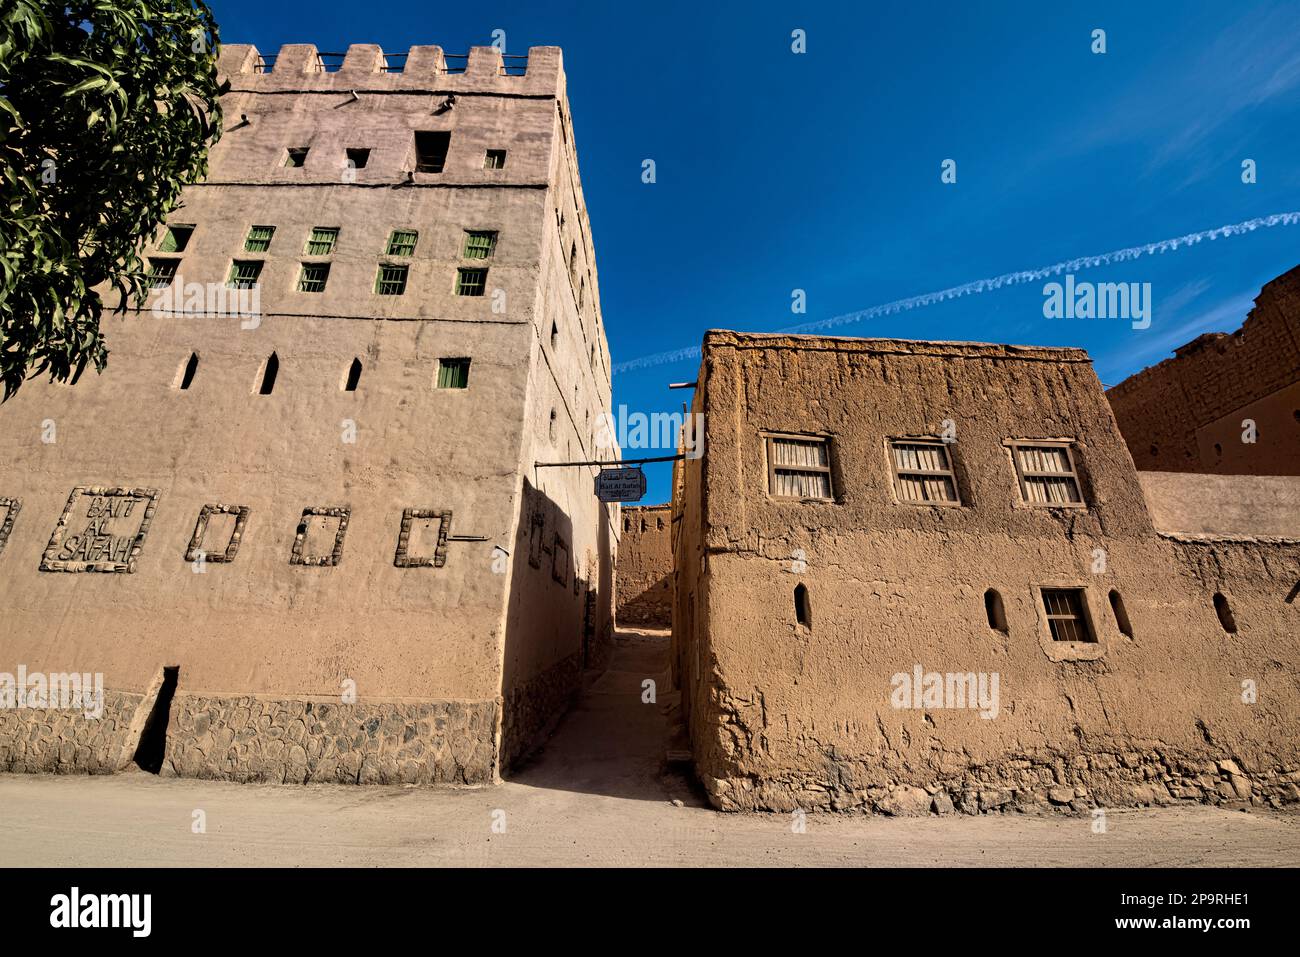 Traditional Bait al Safah old house and living museum amongst the ruins in Al Hamra, Oman Stock Photo